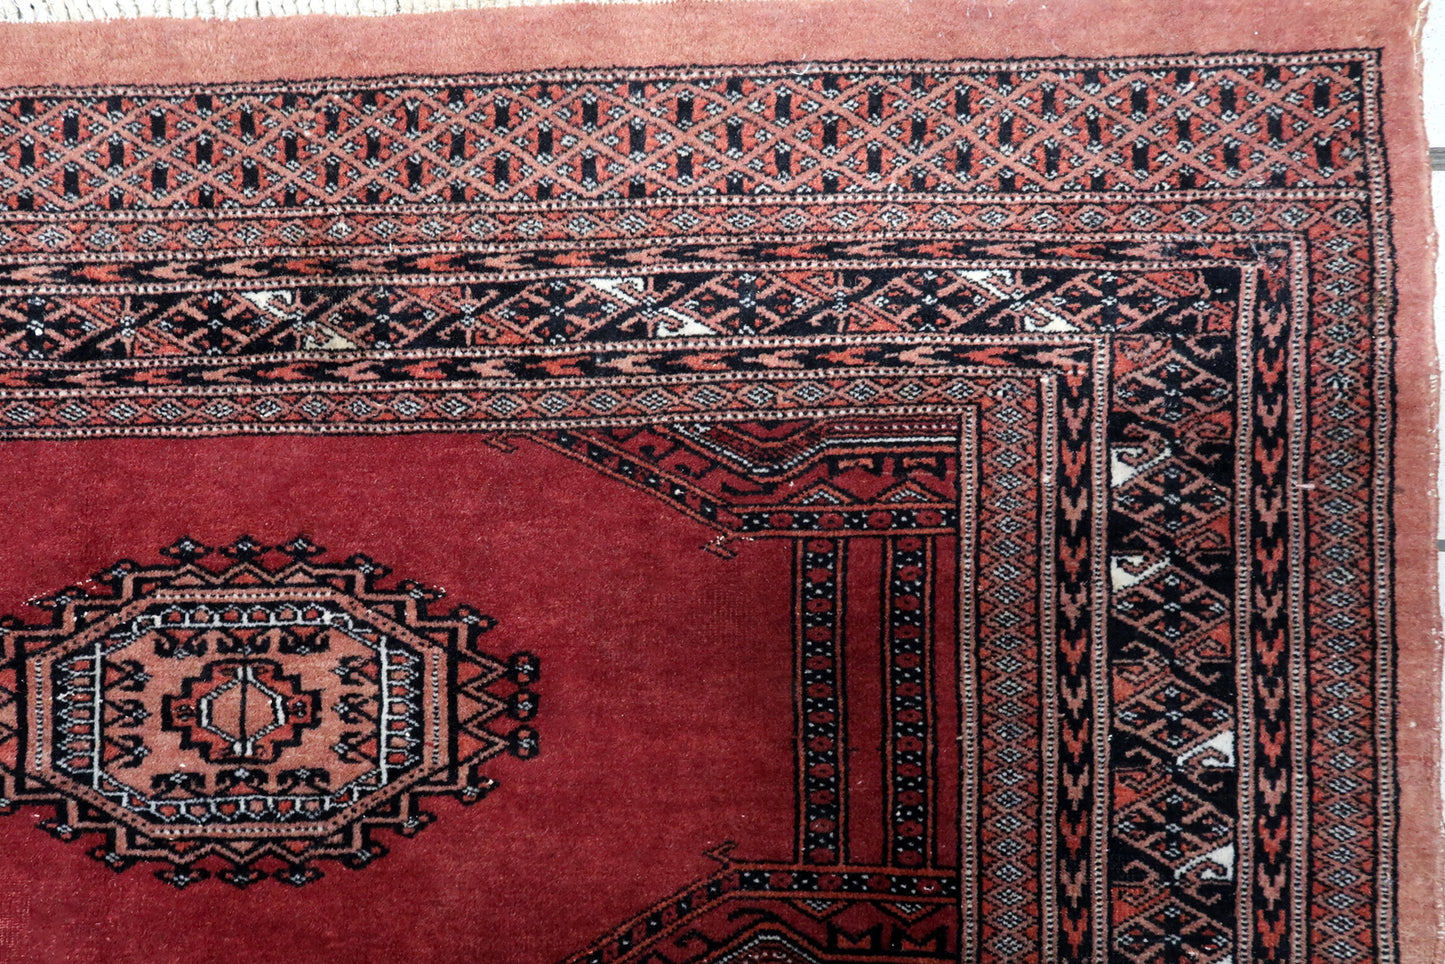 Close-up of Intricate Rug Patterns